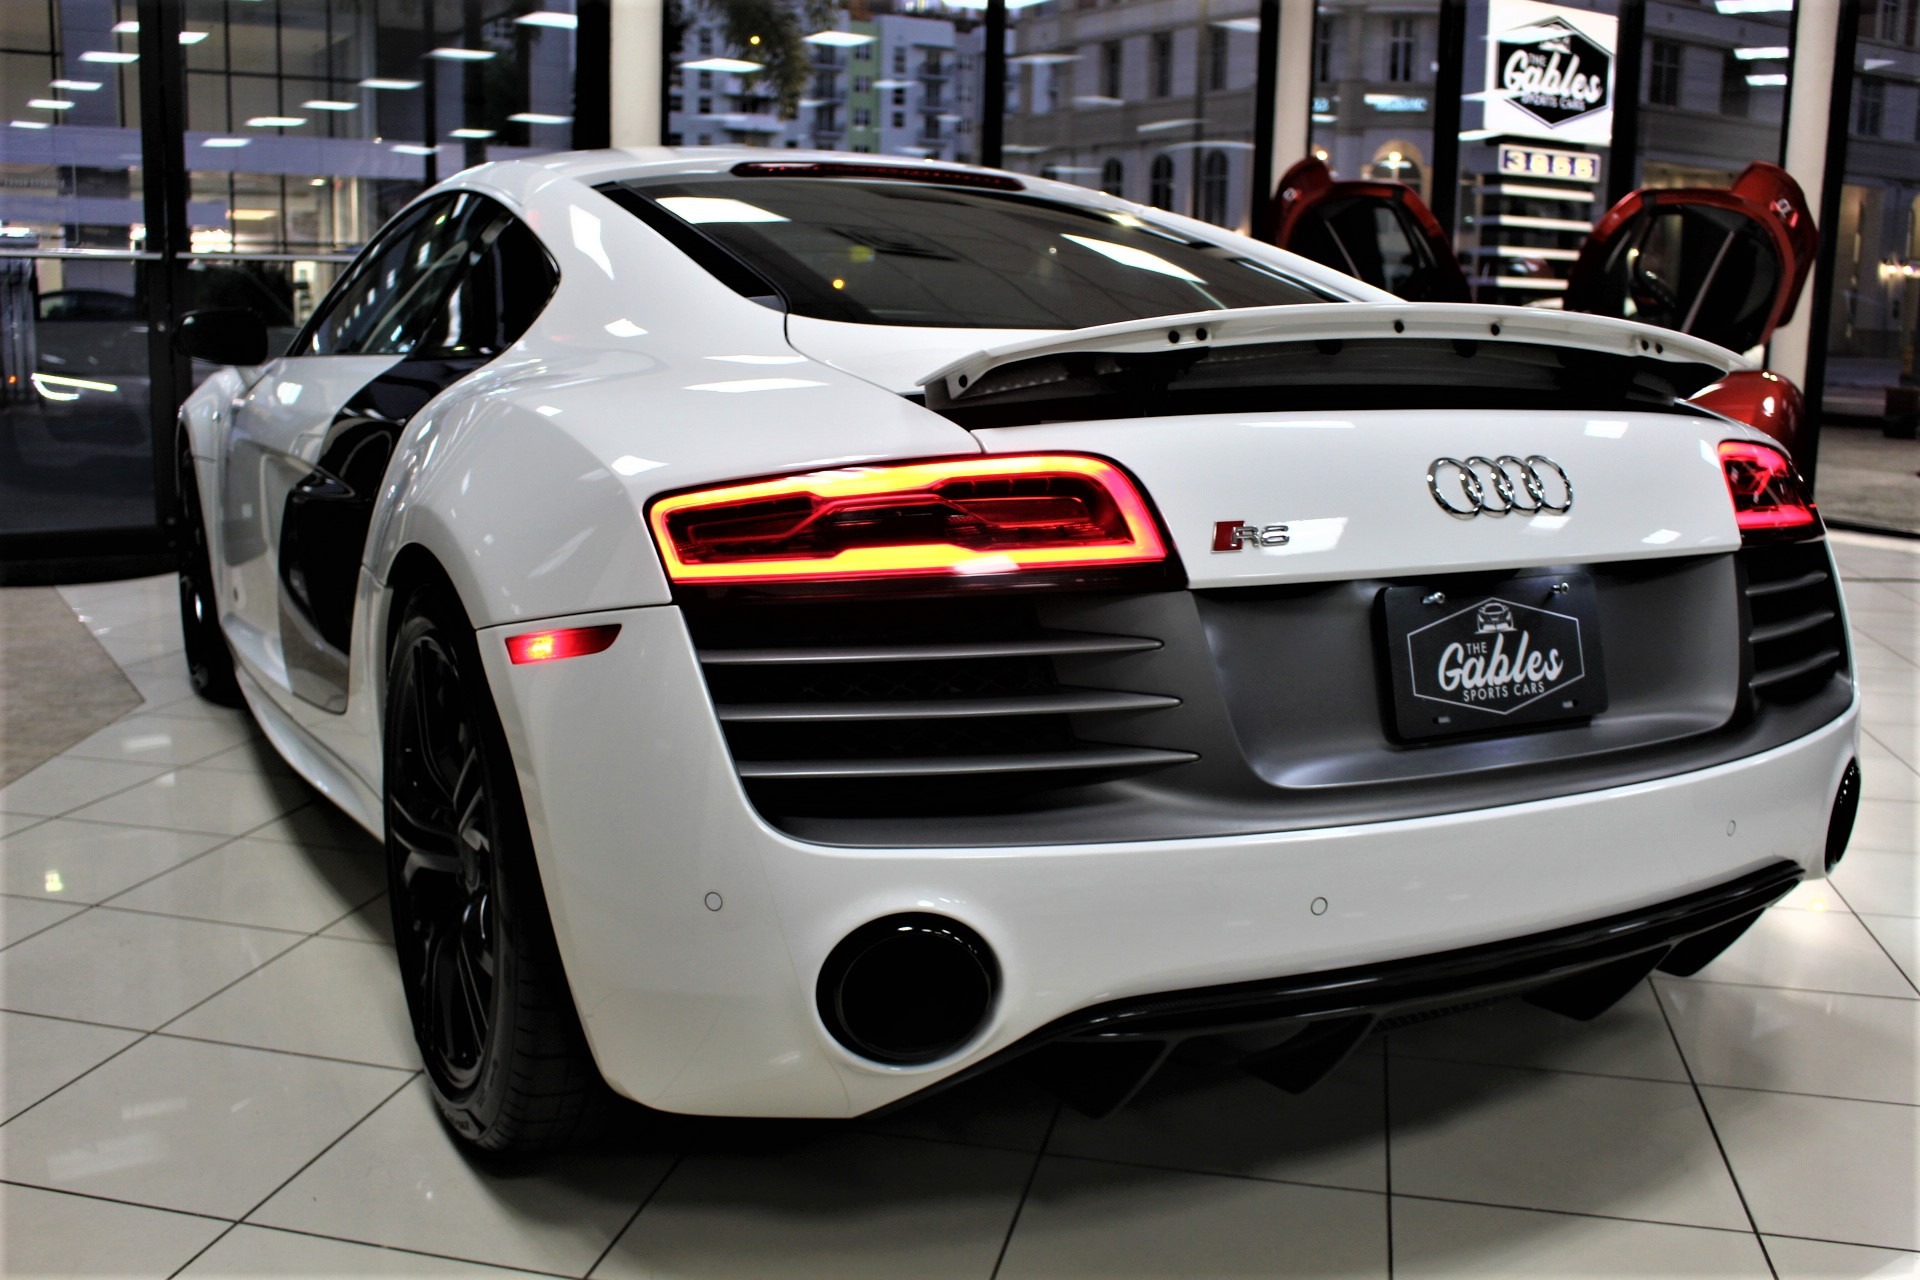 Used 2014 Audi R8 Plus 5.2 quattro for sale Sold at The Gables Sports Cars in Miami FL 33146 4